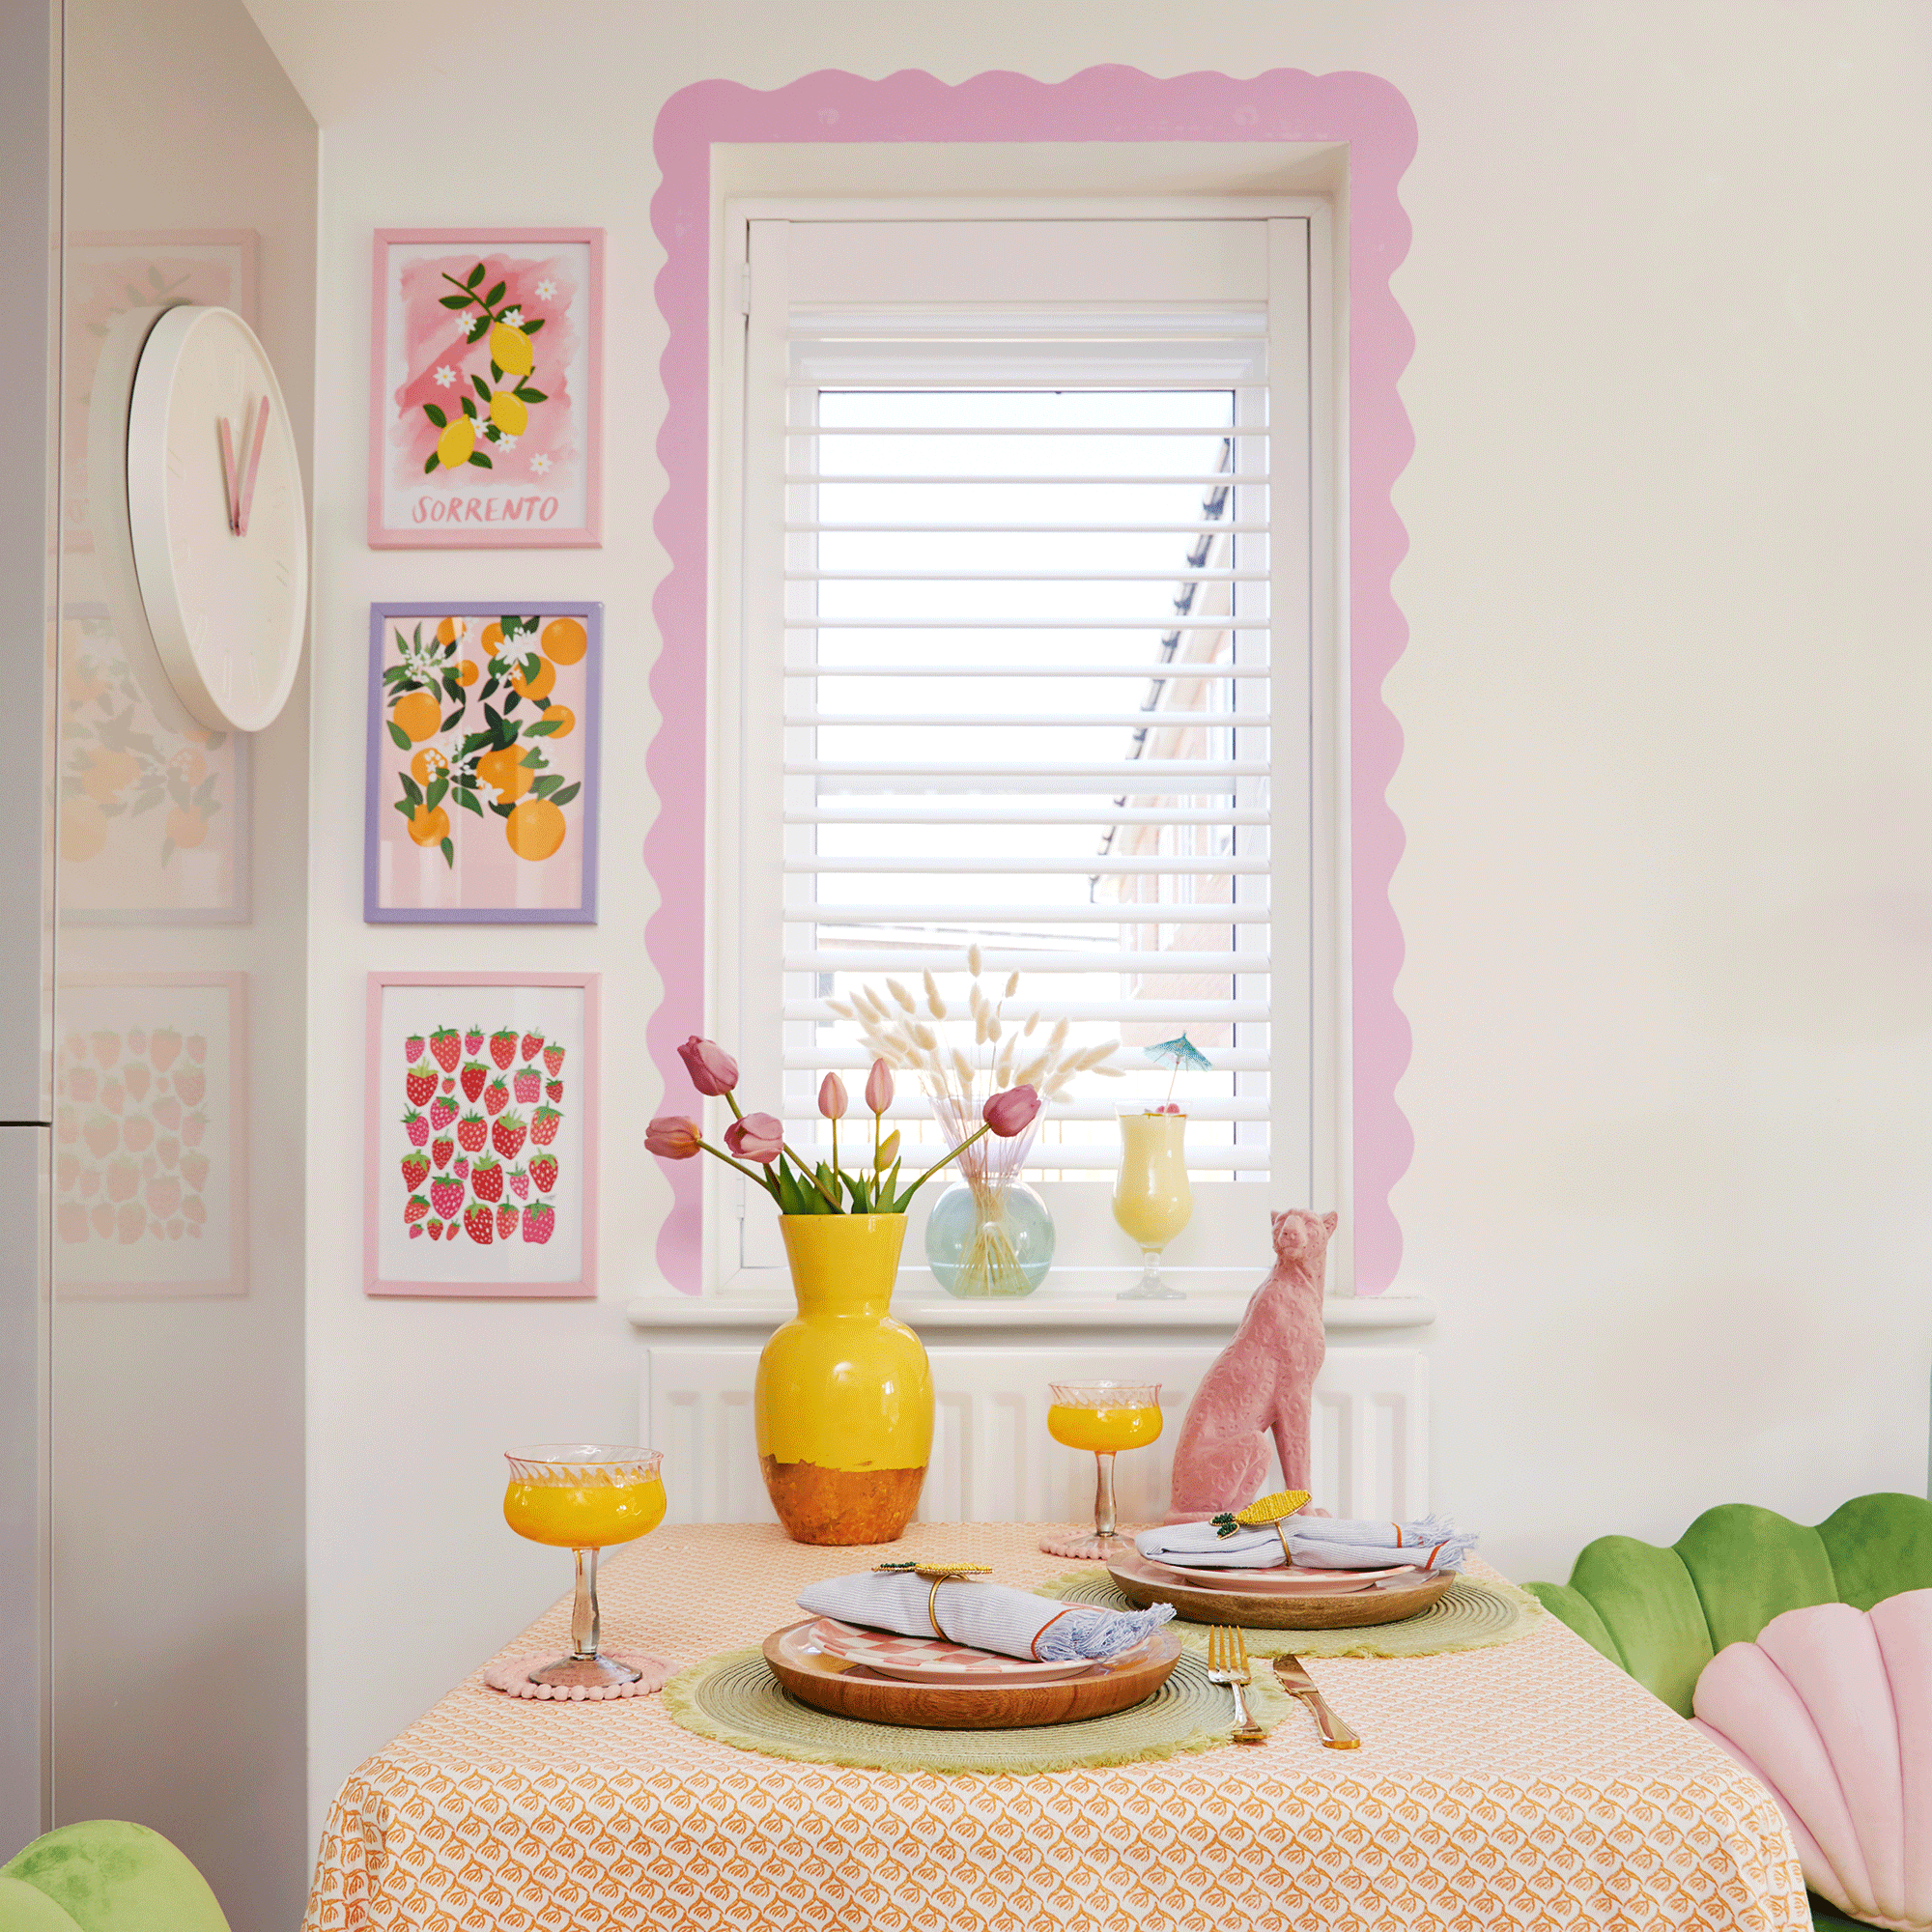 Window with pink squiggle border and table